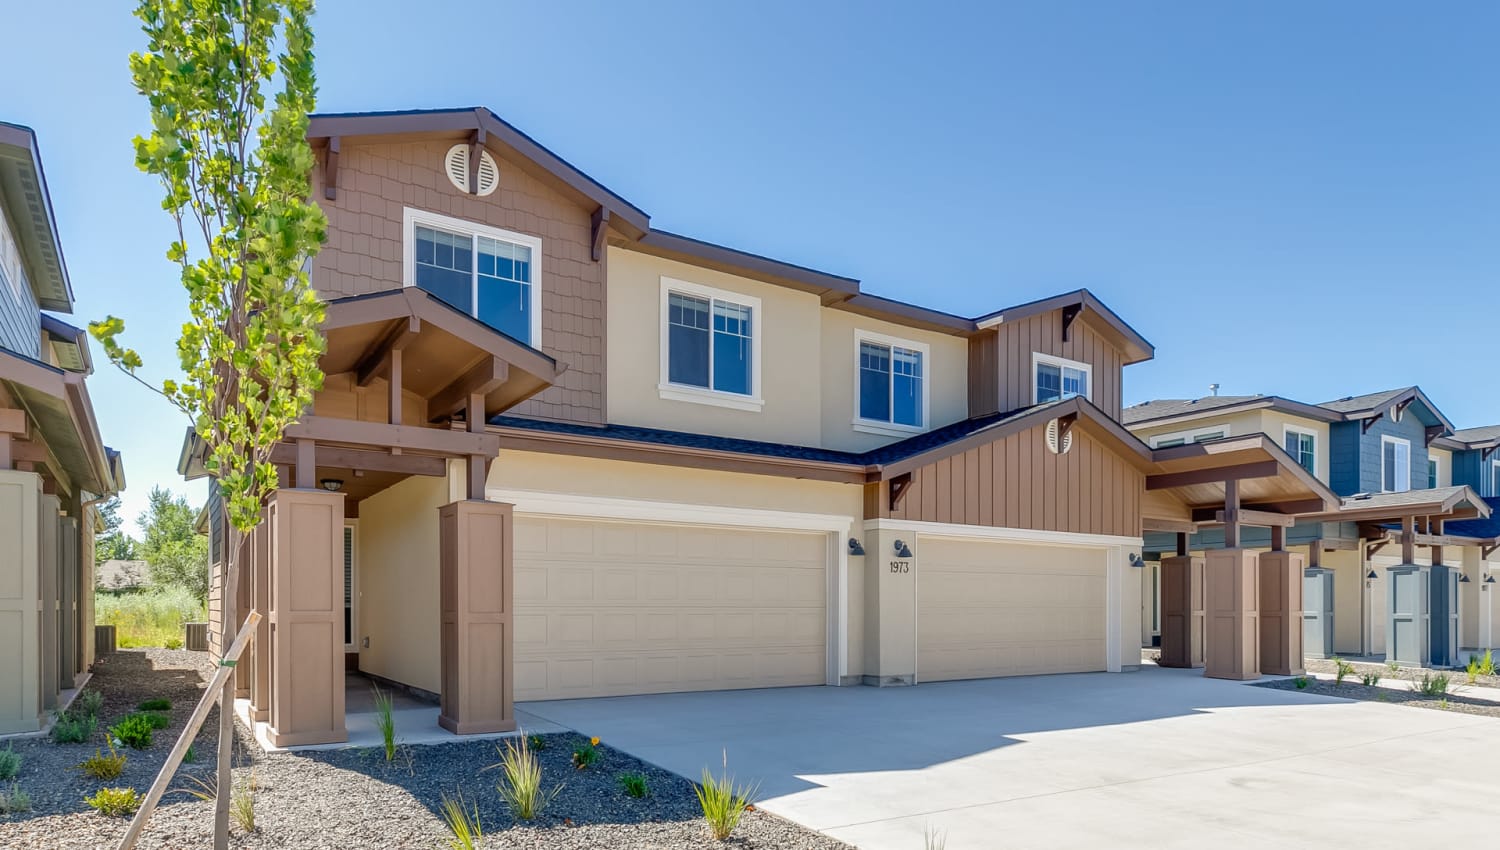 Townhome exterior at Olympus at Ten Mile in Meridian, Idaho